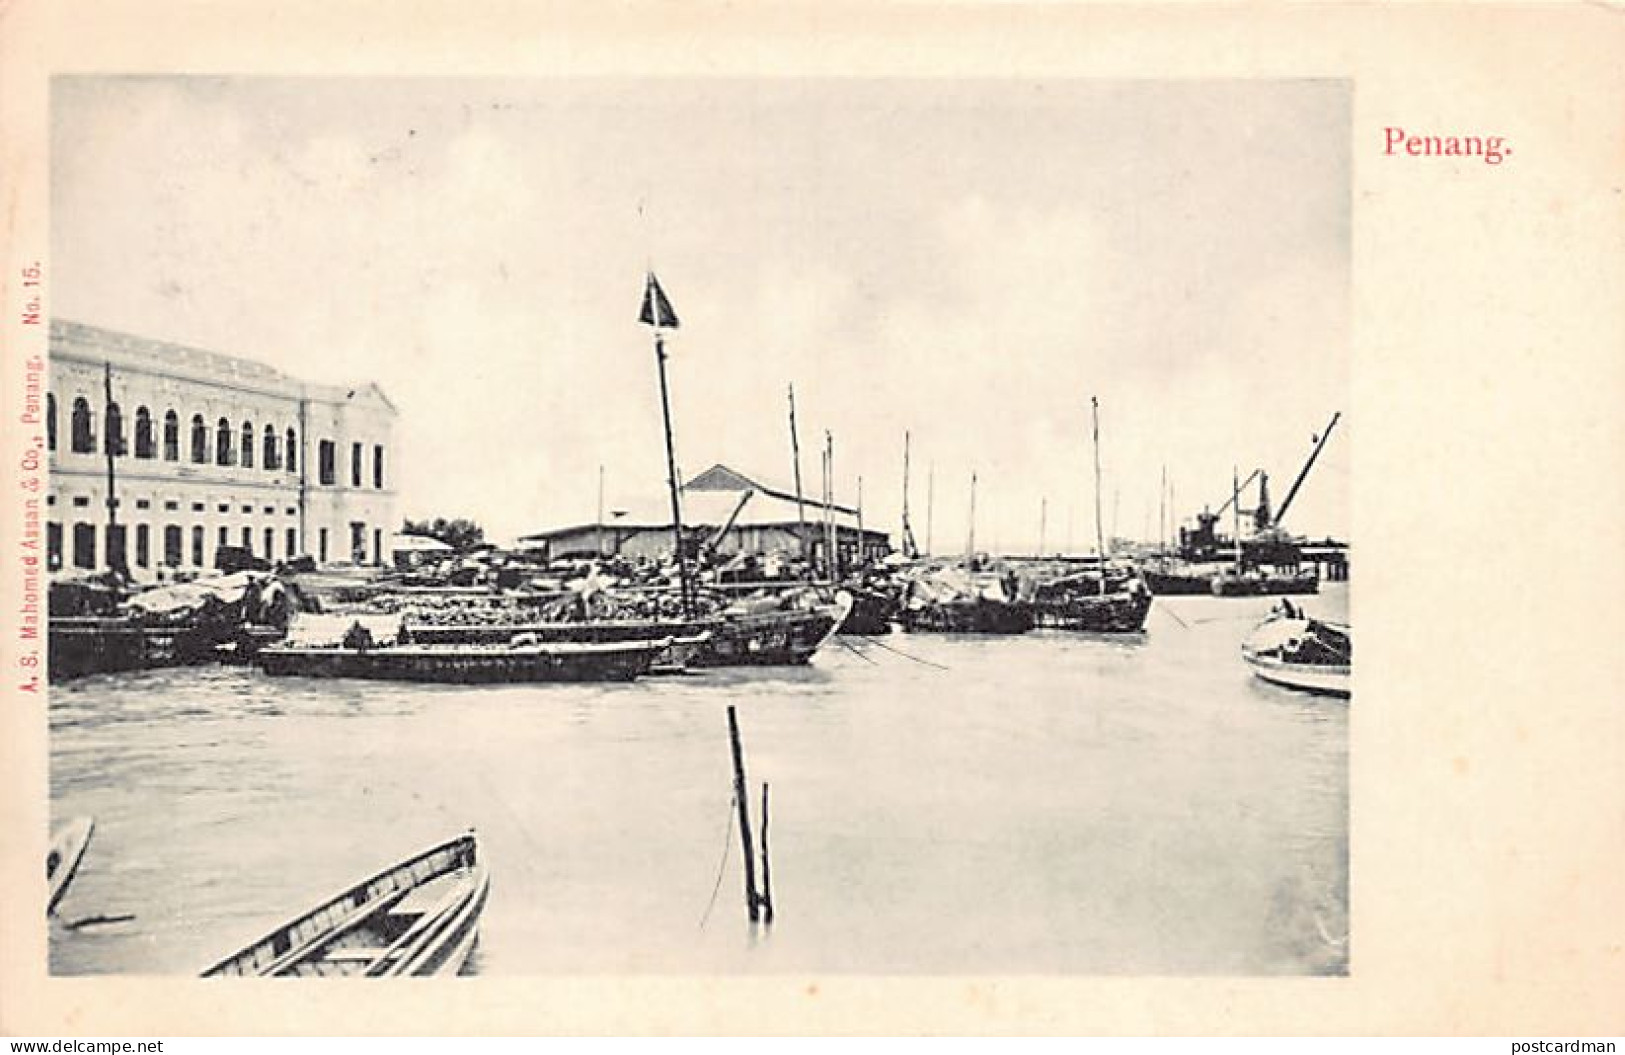 Malaysia - PENANG - The Harbour - Publ. A. S. Mahomed Assan & Co. 15 - Malasia